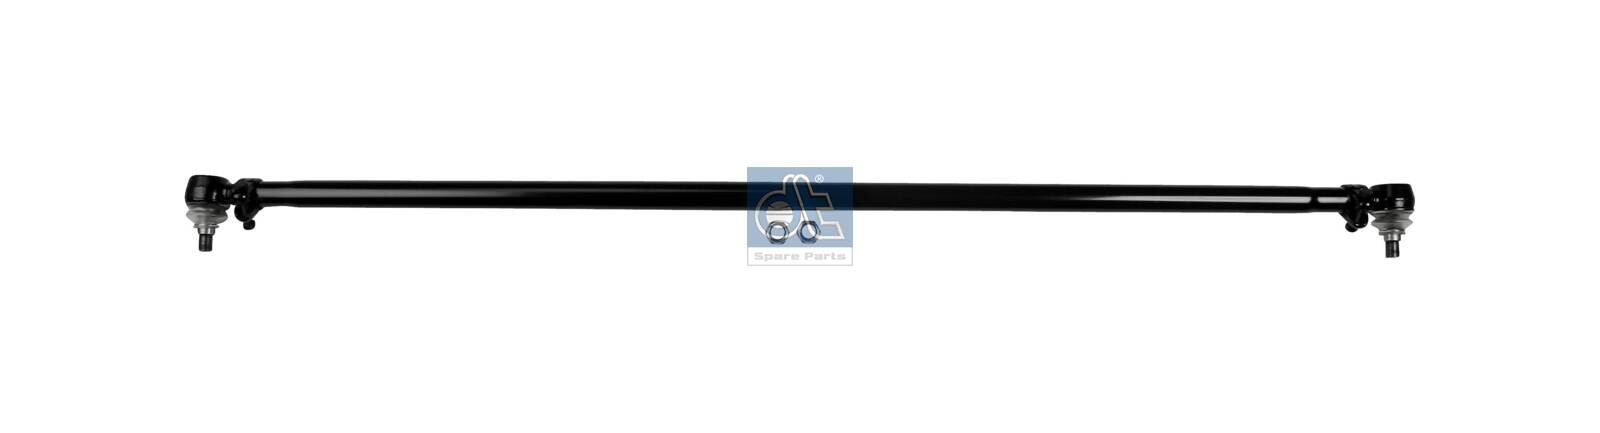 DT Spare Parts 4.64591 Rod Assembly 970 330 02 03